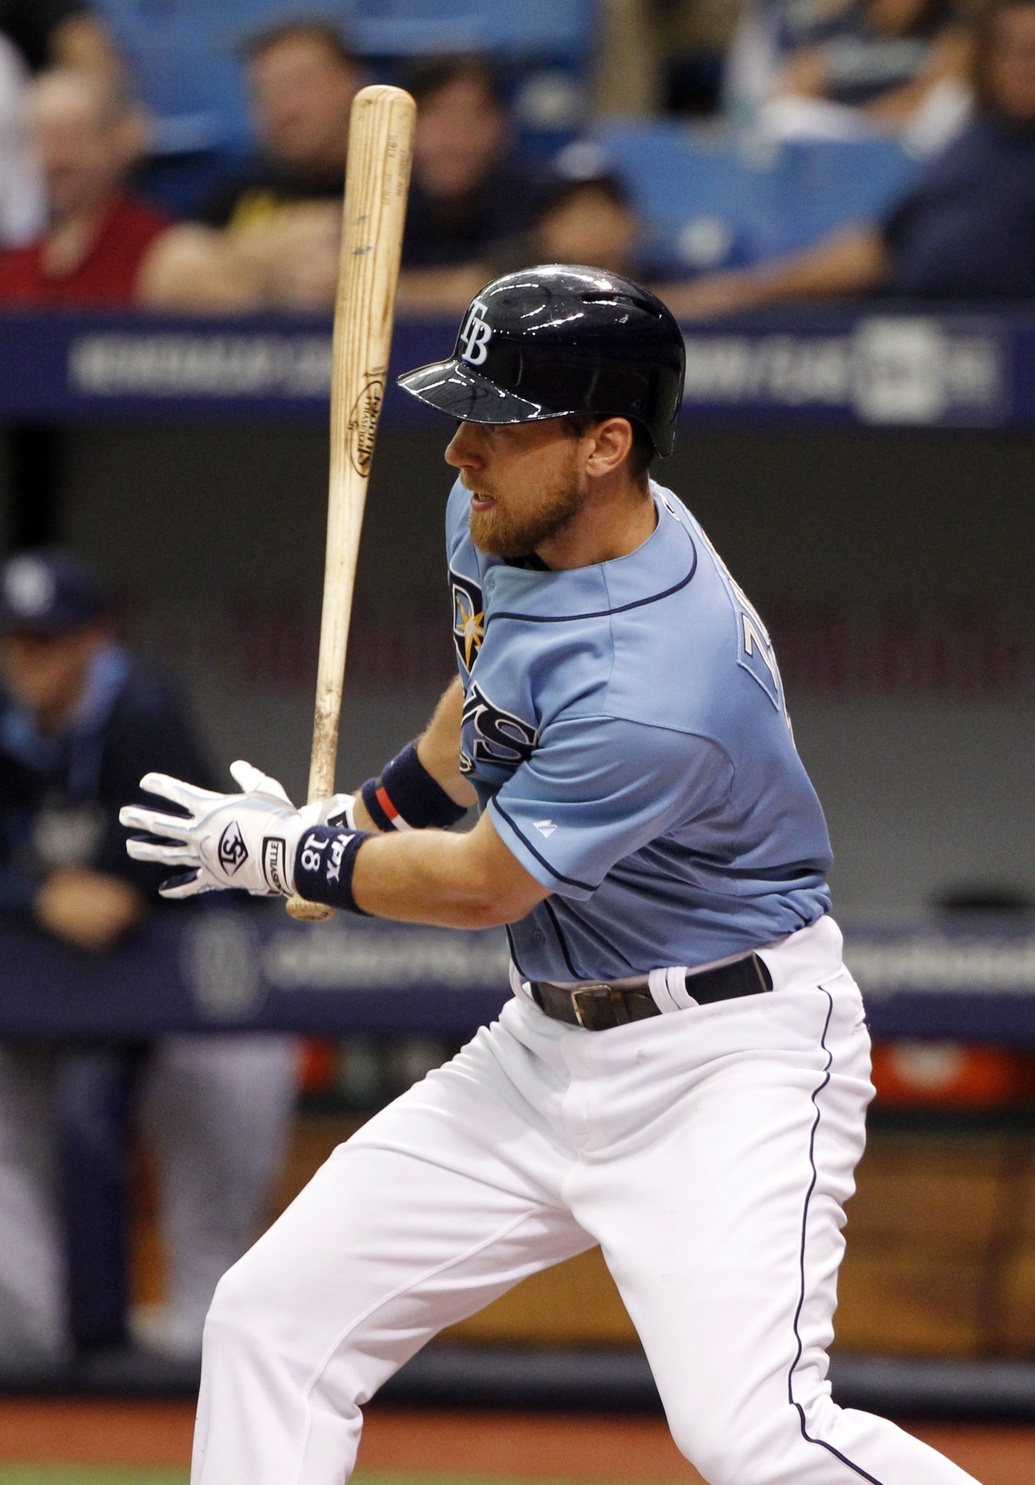 Tampa Bay Rays agree to extension with Ben Zobrist - ESPN